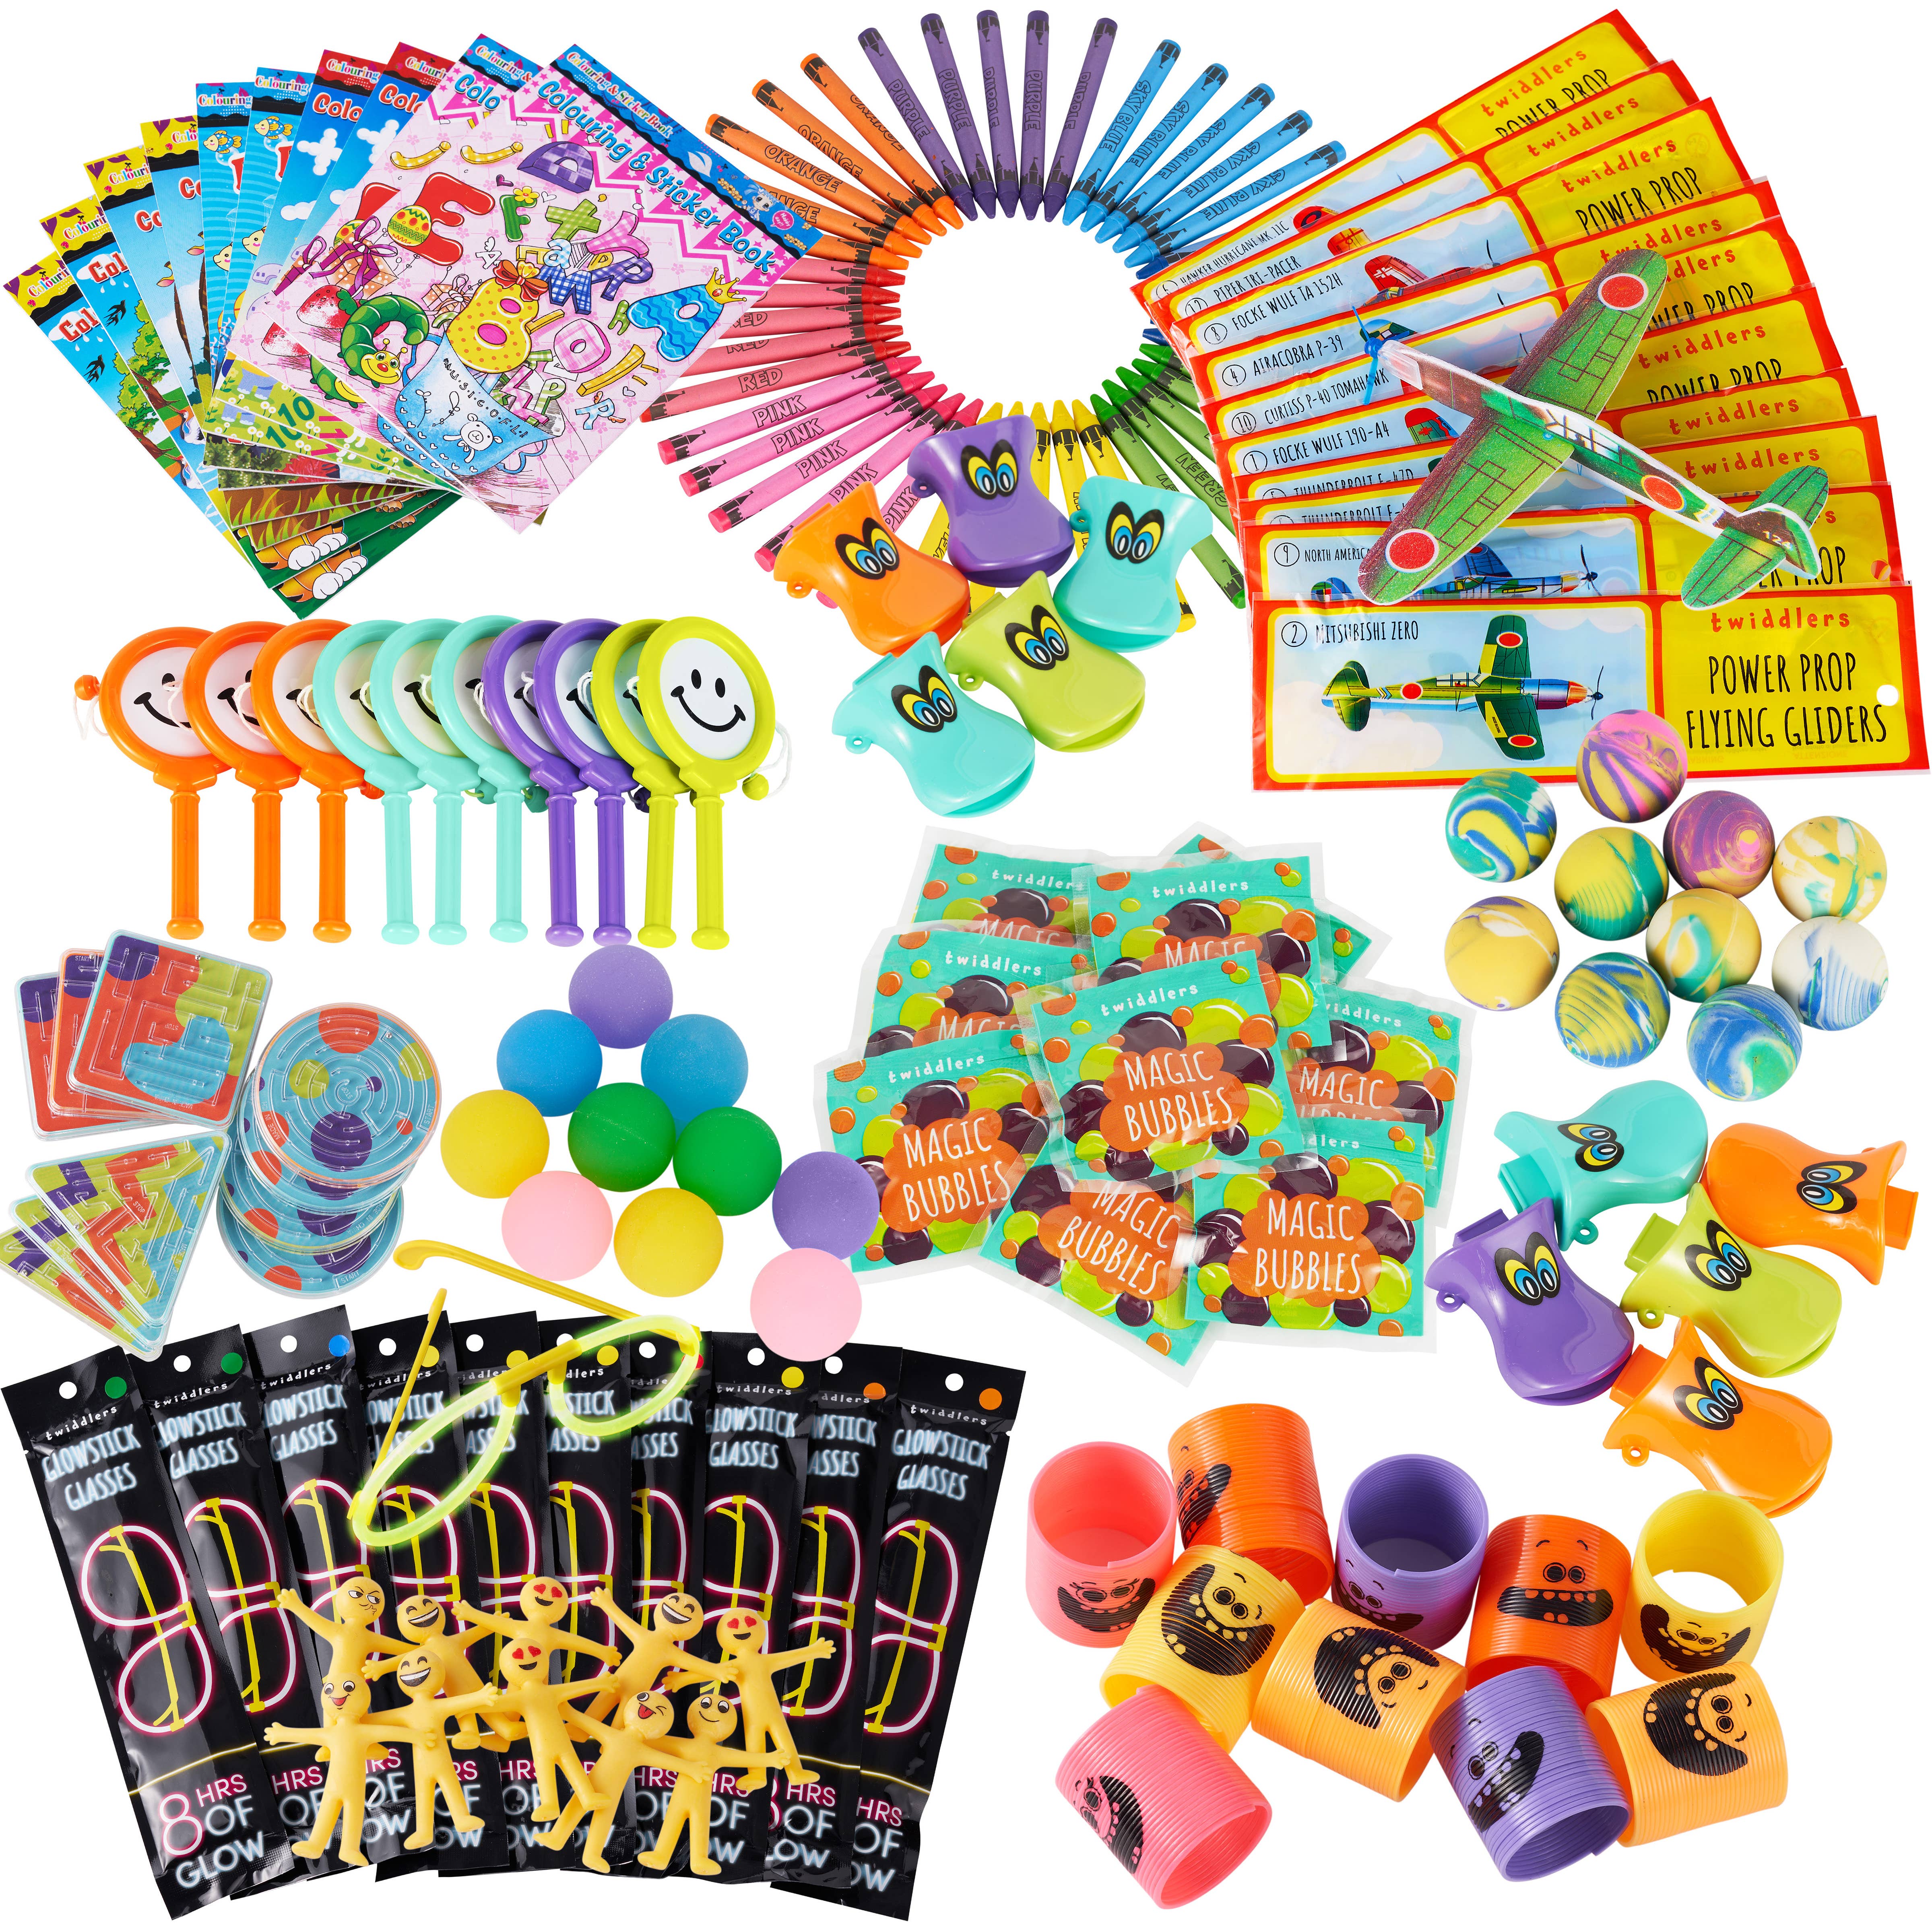 The Twiddlers wholesale products